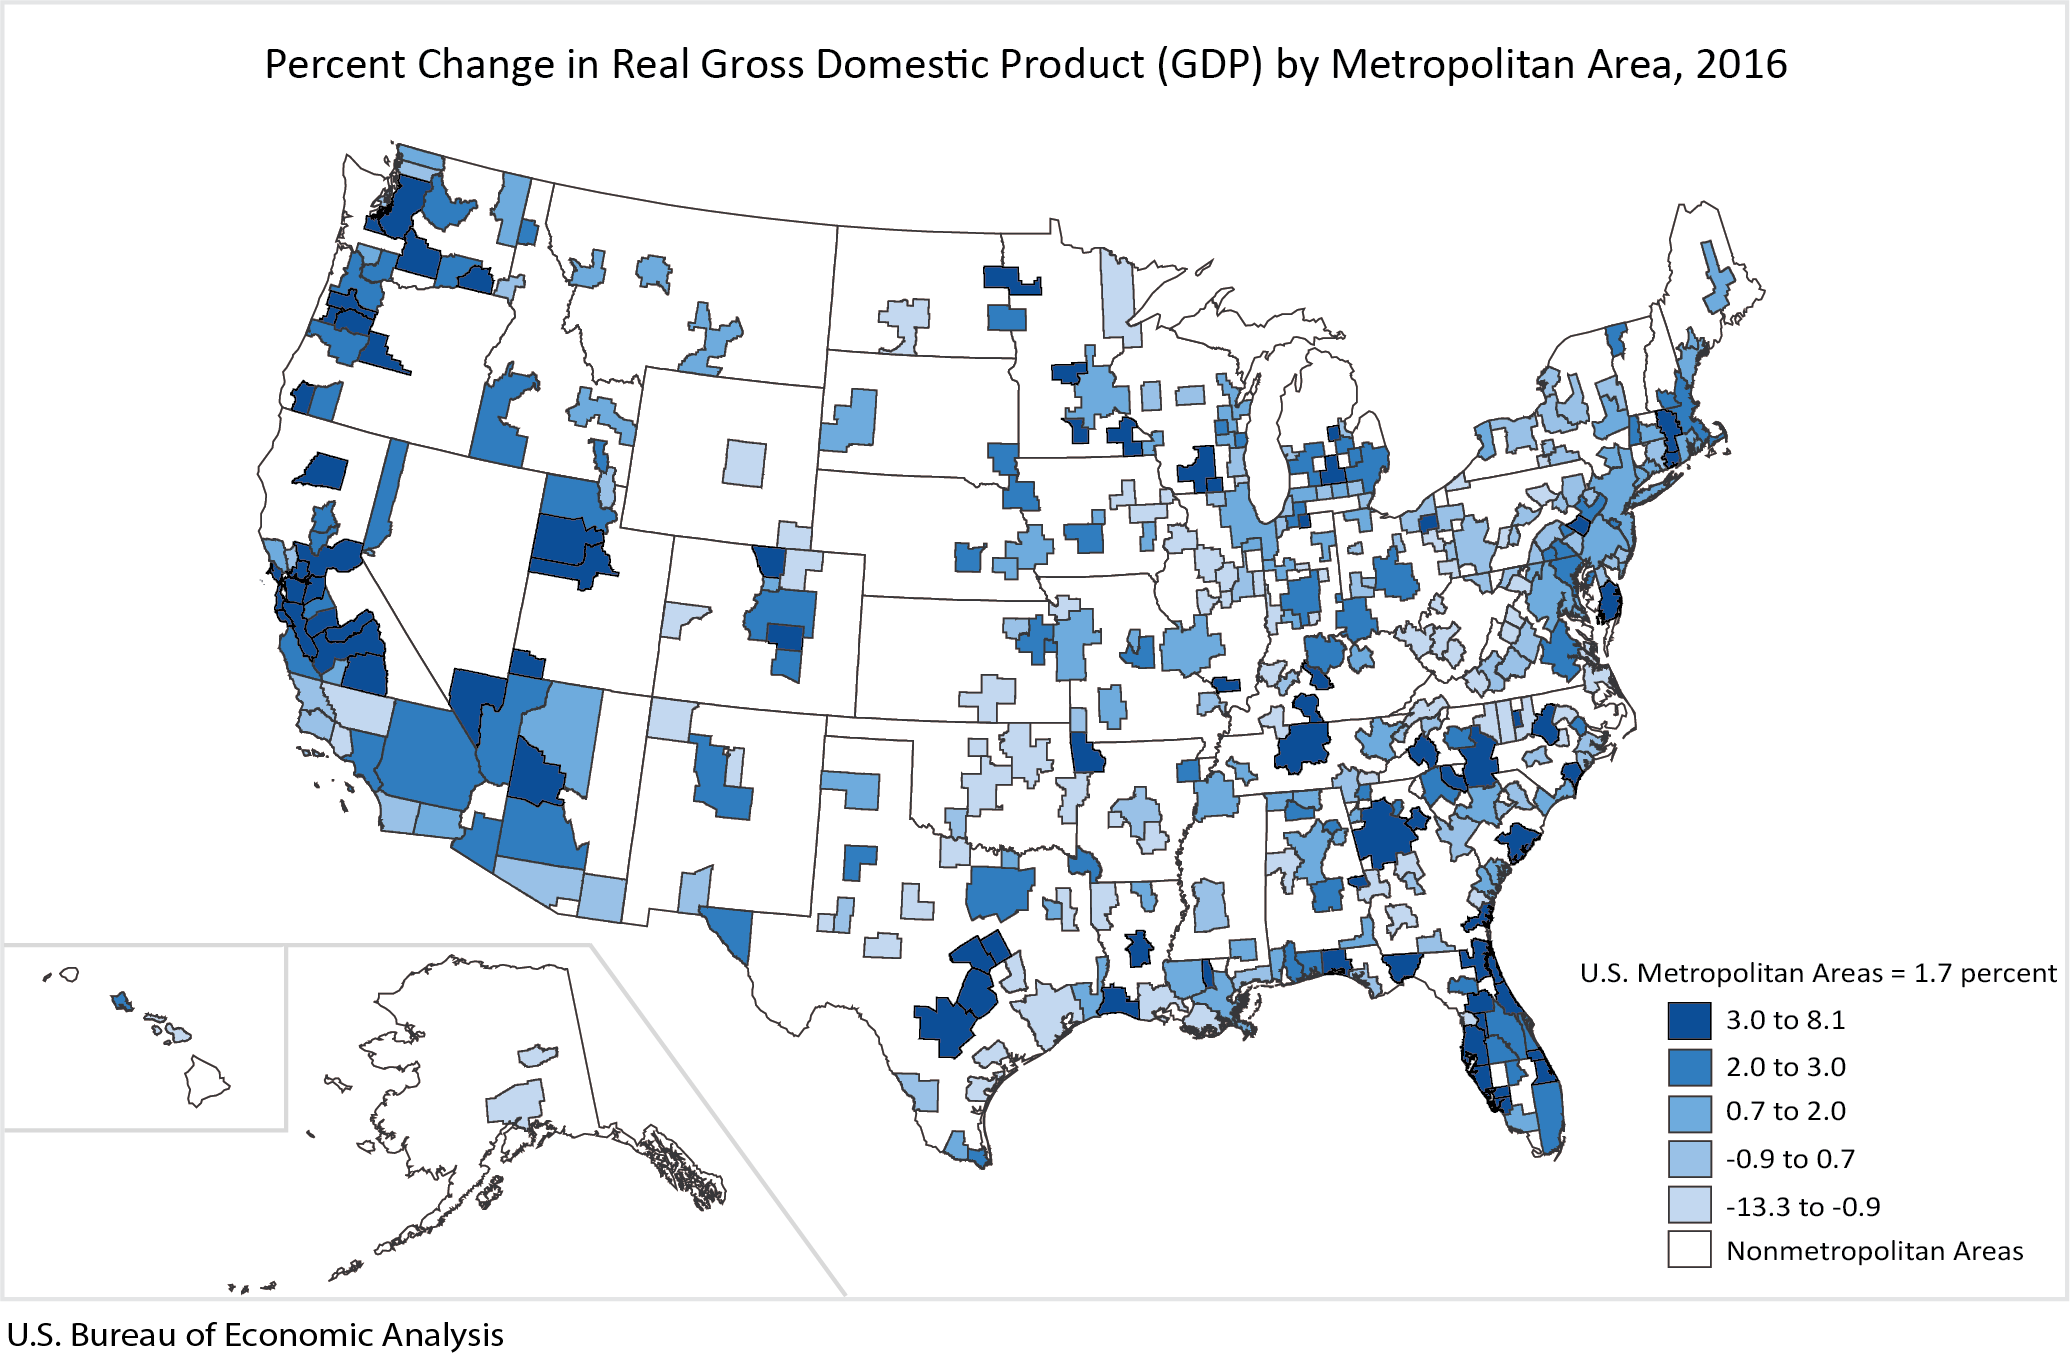 Graph of Percent Change in Real GDP by Metropolitan Area, 2016